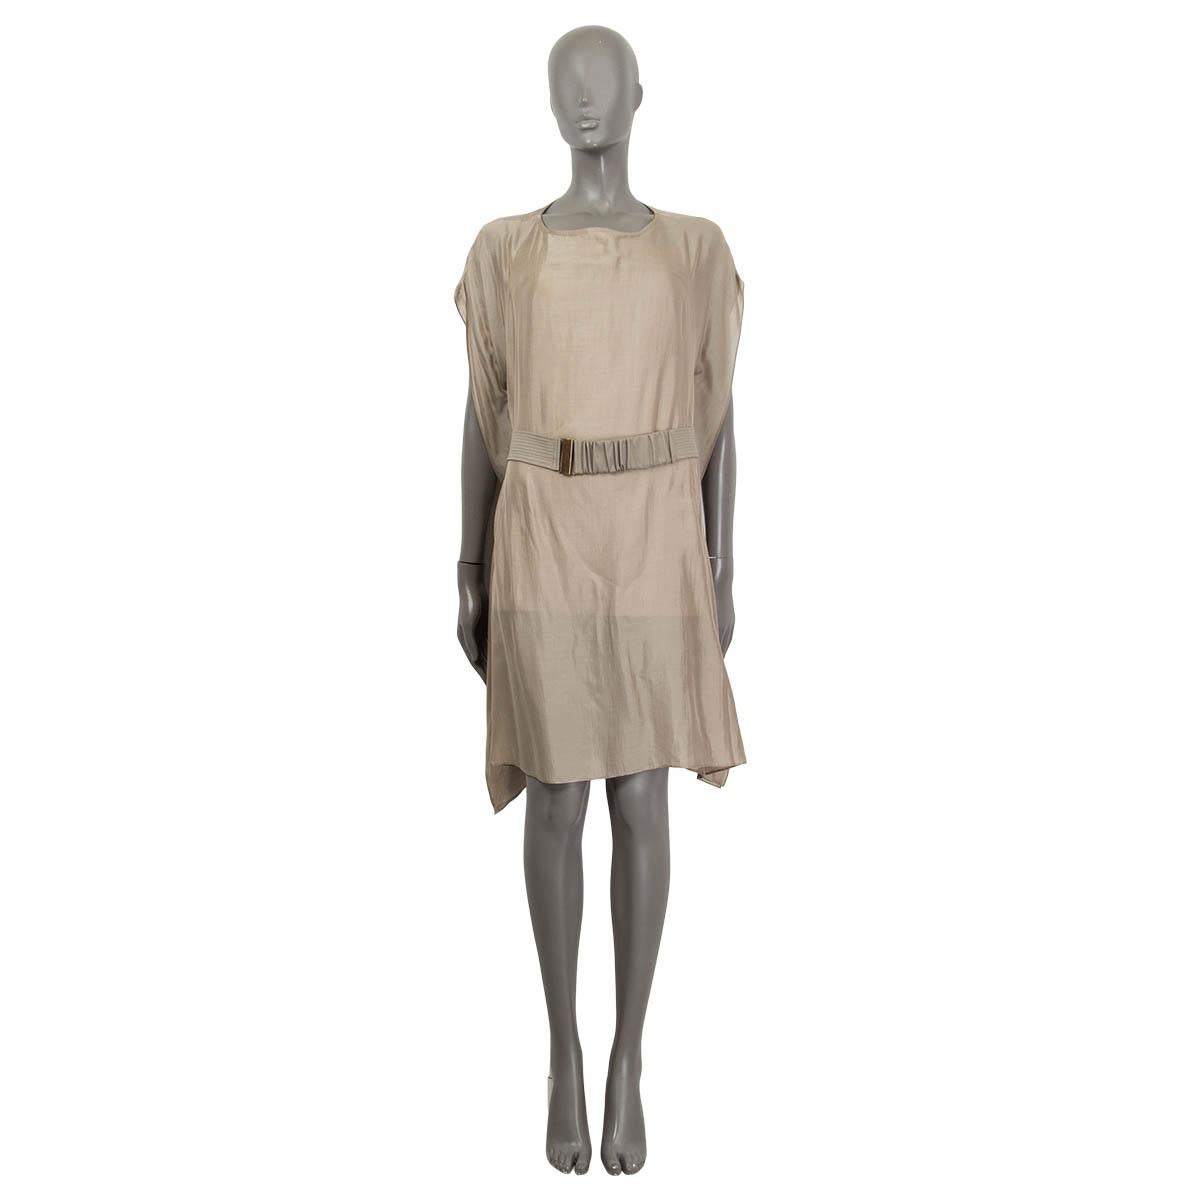 100% authentic Brunello Cucinelli belted tunic dress in sage silk (assumed cause tag is missing). Features a detachable belt and comes with a slit dress in sage cotton (90%) and lycra (10%). Opens with a button at the back. Has been worn and is in